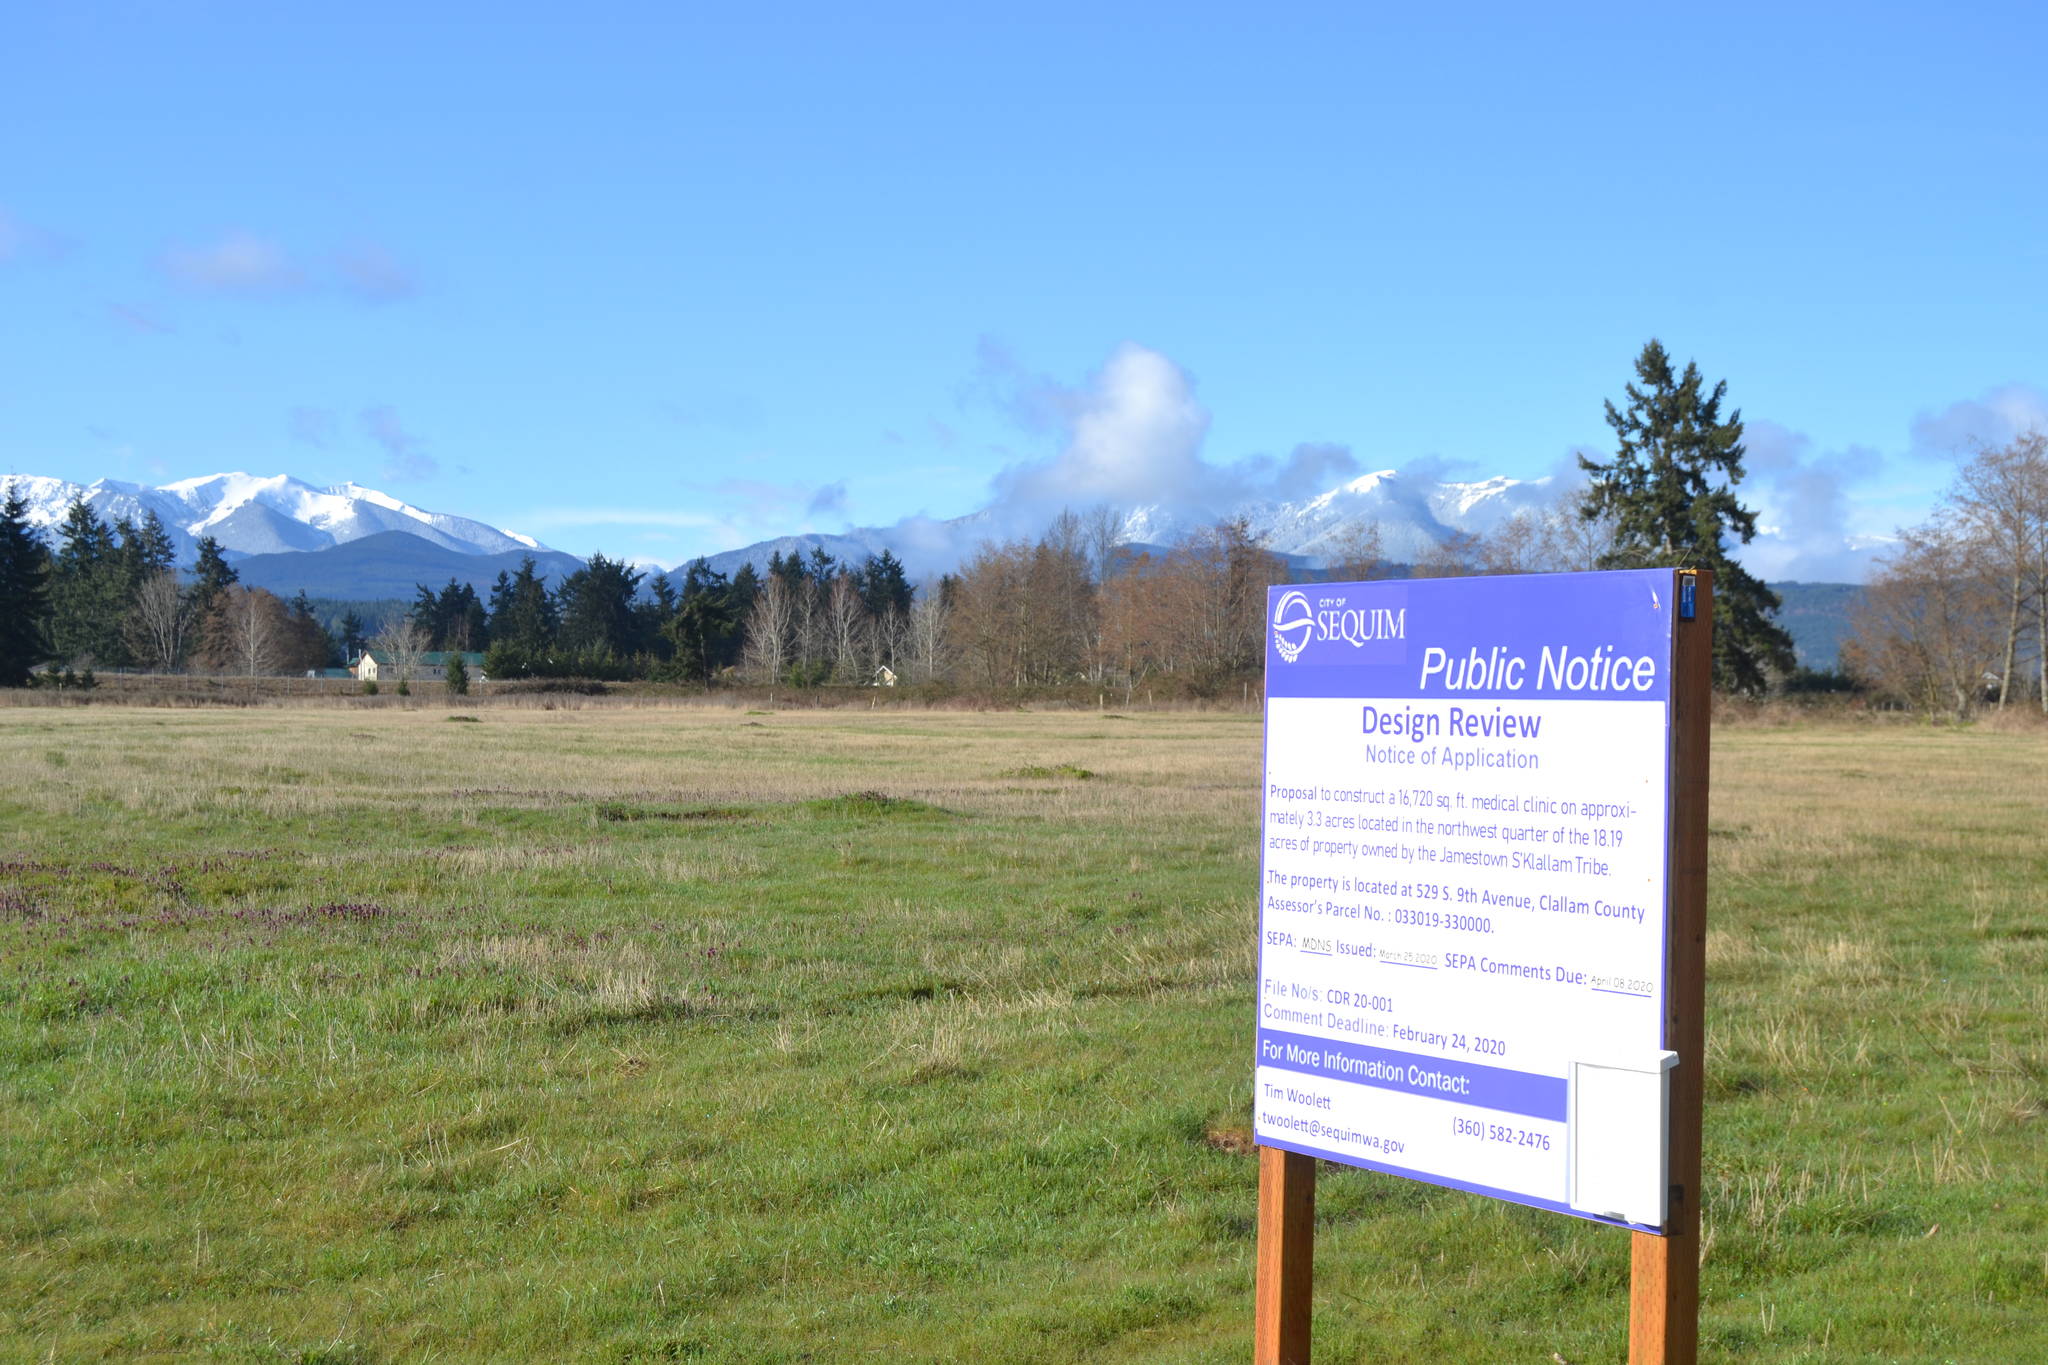 A notice was published March 25 online, in print and on site signs stating that residents have until April 8 to comment on the environmental review of the proposed MAT clinic. Sequim Gazette photo by Matthew Nash